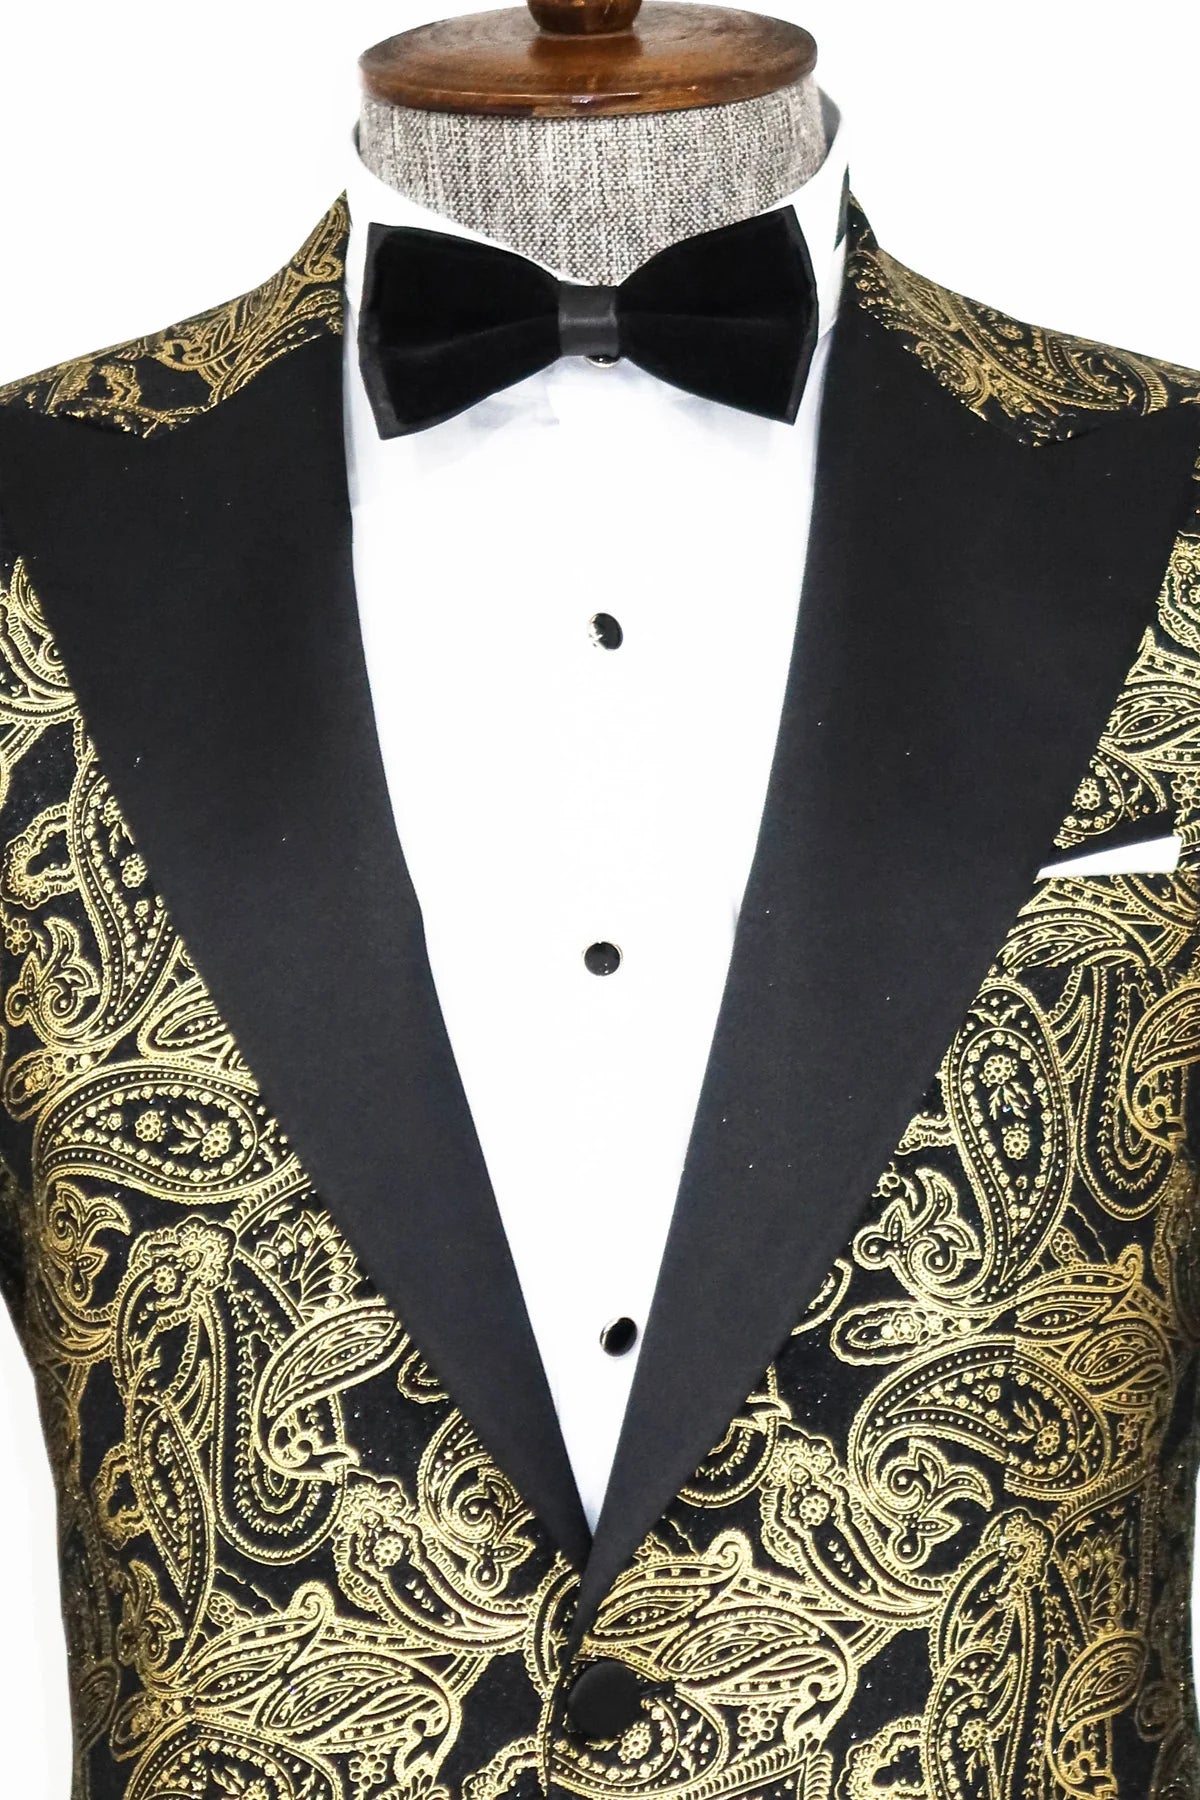 Golden Paisley Black Prom Blazer with Peak Lapel, perfect for proms and other formal events, available exclusively at KCT Menswear.